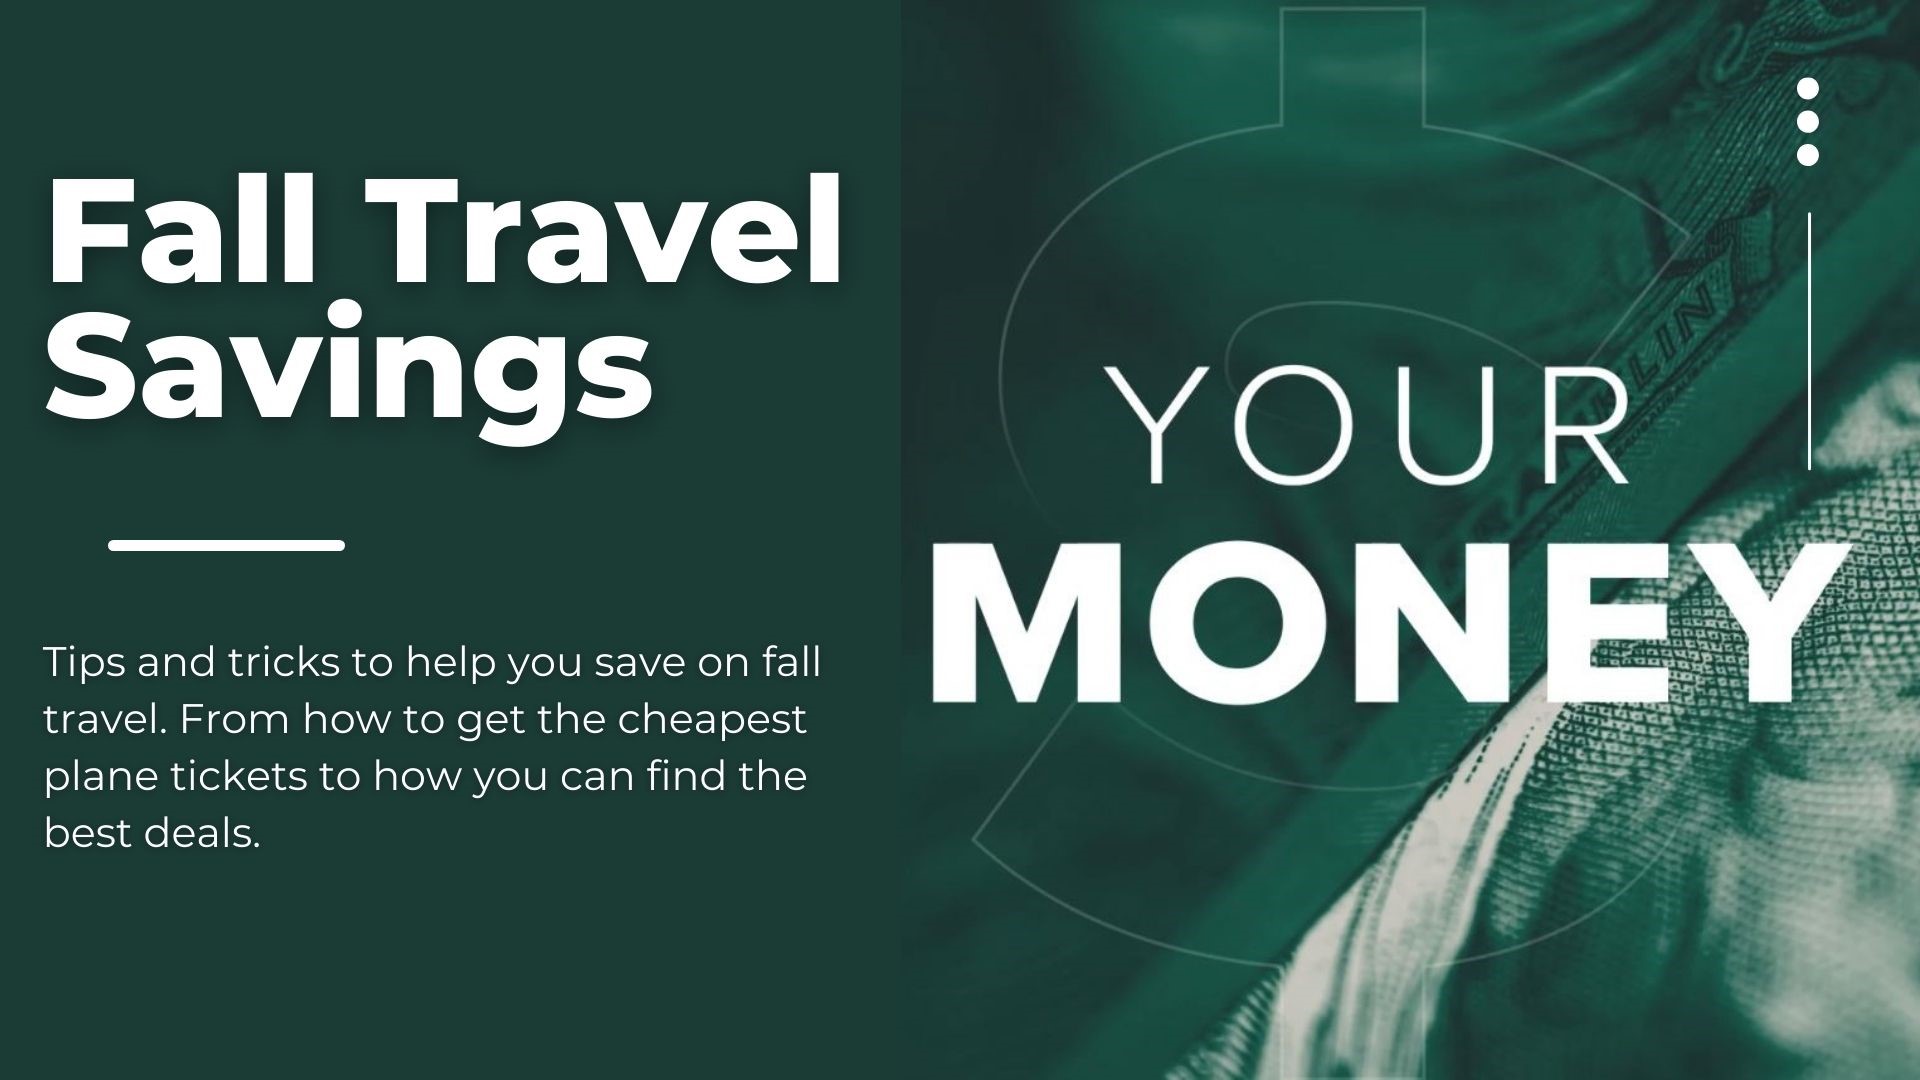 Tips and tricks to help you save on fall travel. From how to get the cheapest plane tickets to how you can find the best deals.